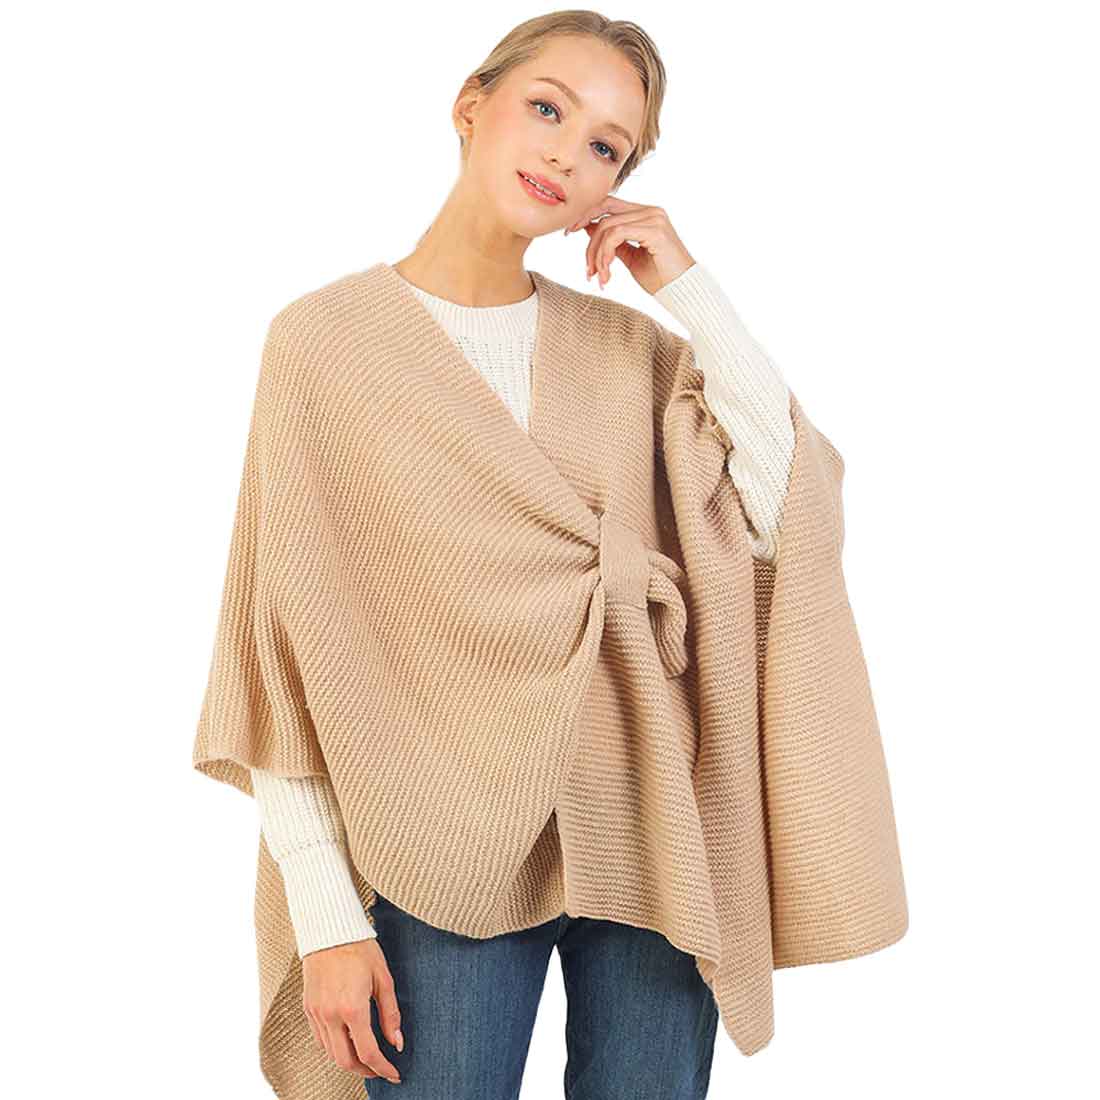 Taupe  Solid Knitted Basic Cape, is beautifully designed with solid color that amps up your beauty to a greater extent. It enriches your attire with perfect combination. Breathable Fabric, comfortable to wear, and very easy to put on and off. Suitable for Weekend, Work, Holiday, Beach, Party, Club, Night, Evening, Date, Casual and Other Occasions in Spring, Summer and Autumn. Perfect Gift for Wife, Mom, Birthday, Holiday, Anniversary, Fun Night Out.